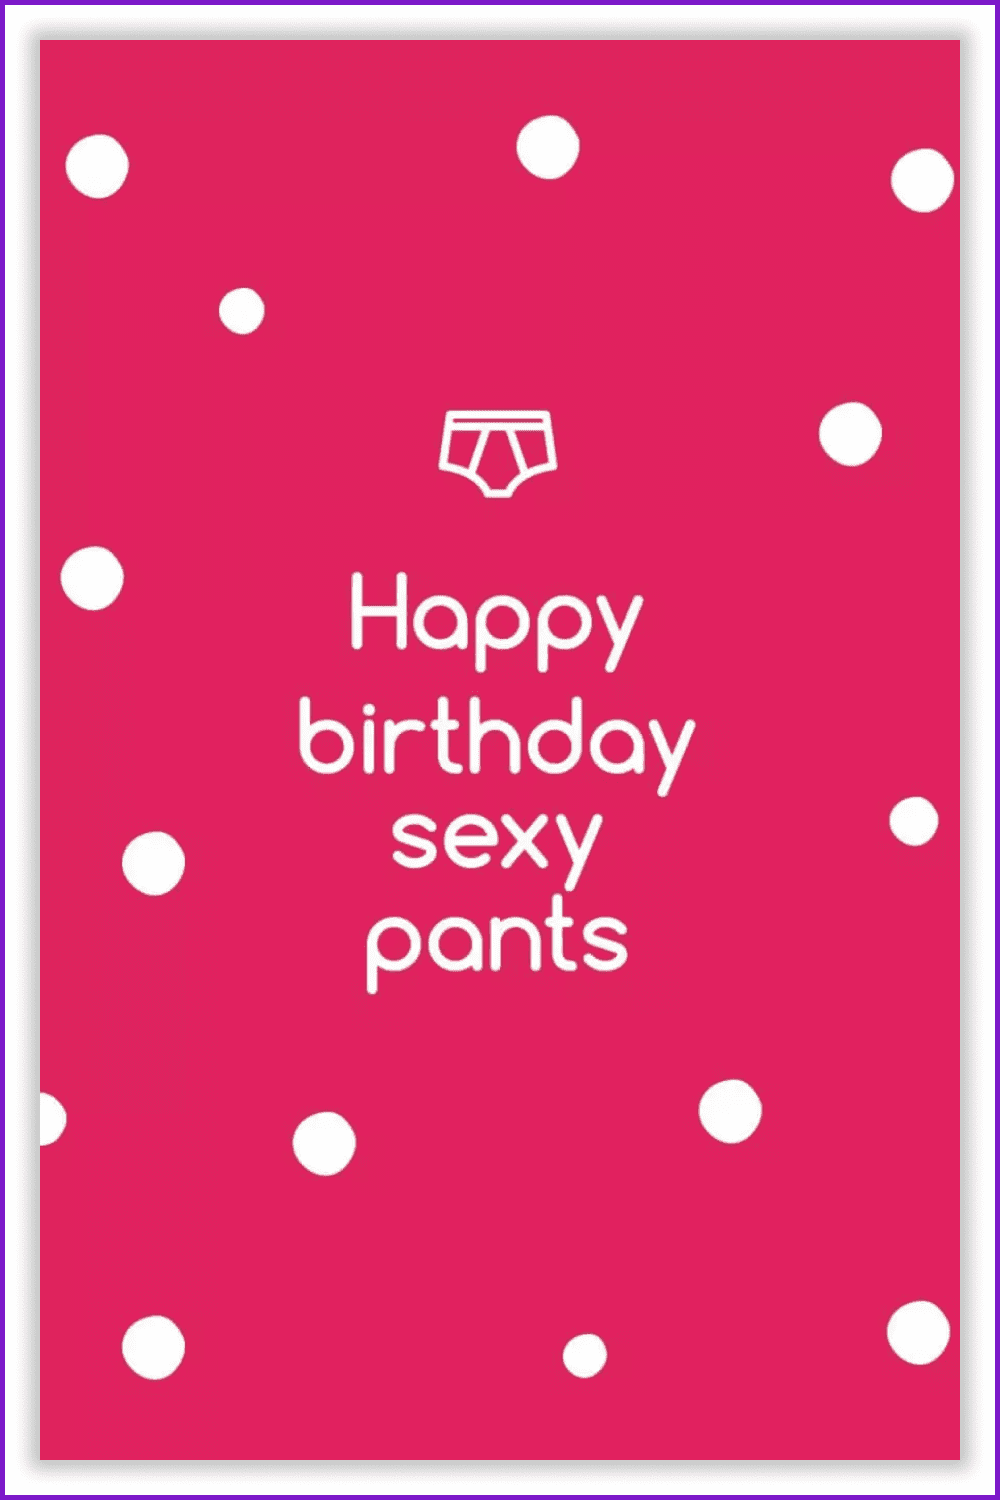 Pink card with white polka dots and white text and panties icon.